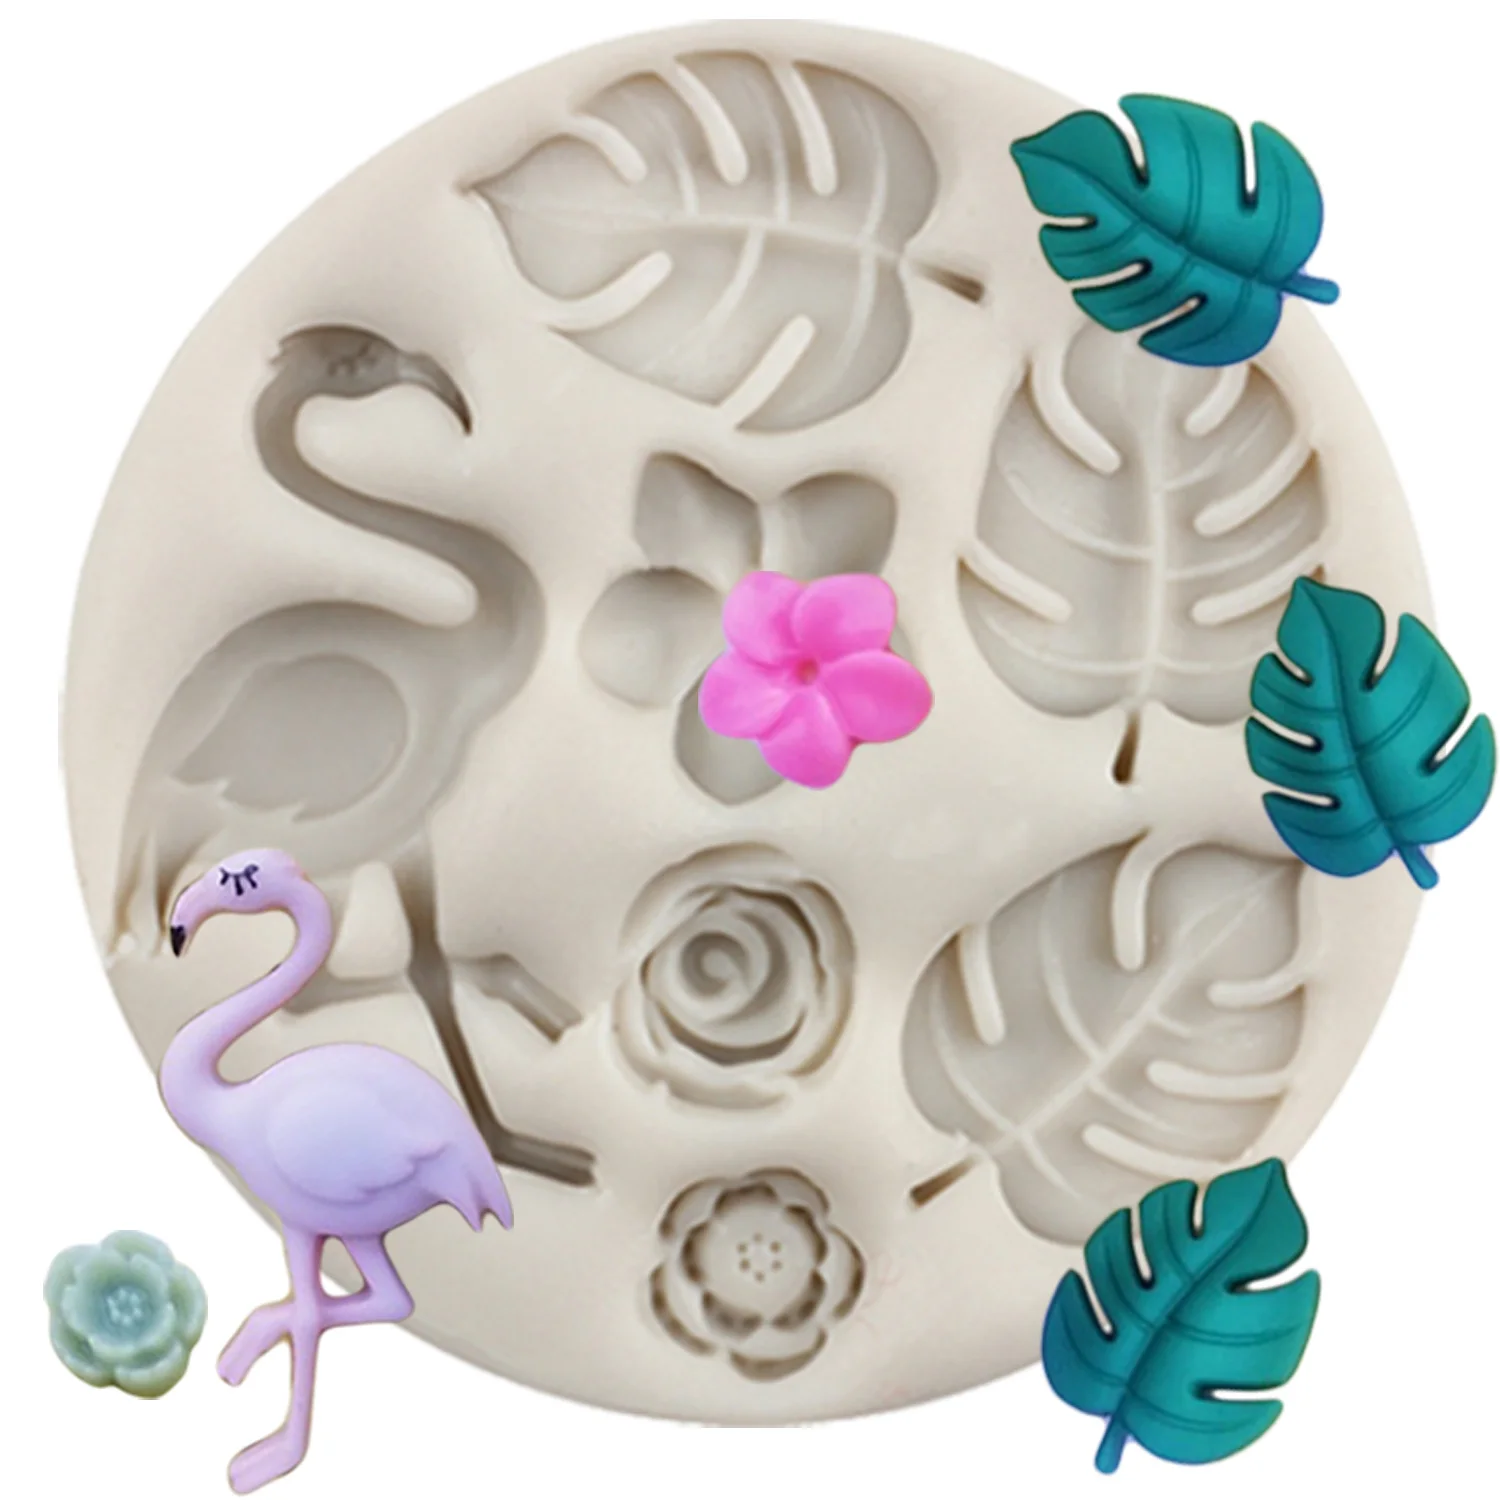 

Flamingo Silicone Mold Party Turtle Leaf Fondant Molds Rose Flower Cake Decorating Tools Chocolate Gumpaste Candy Resin Moulds